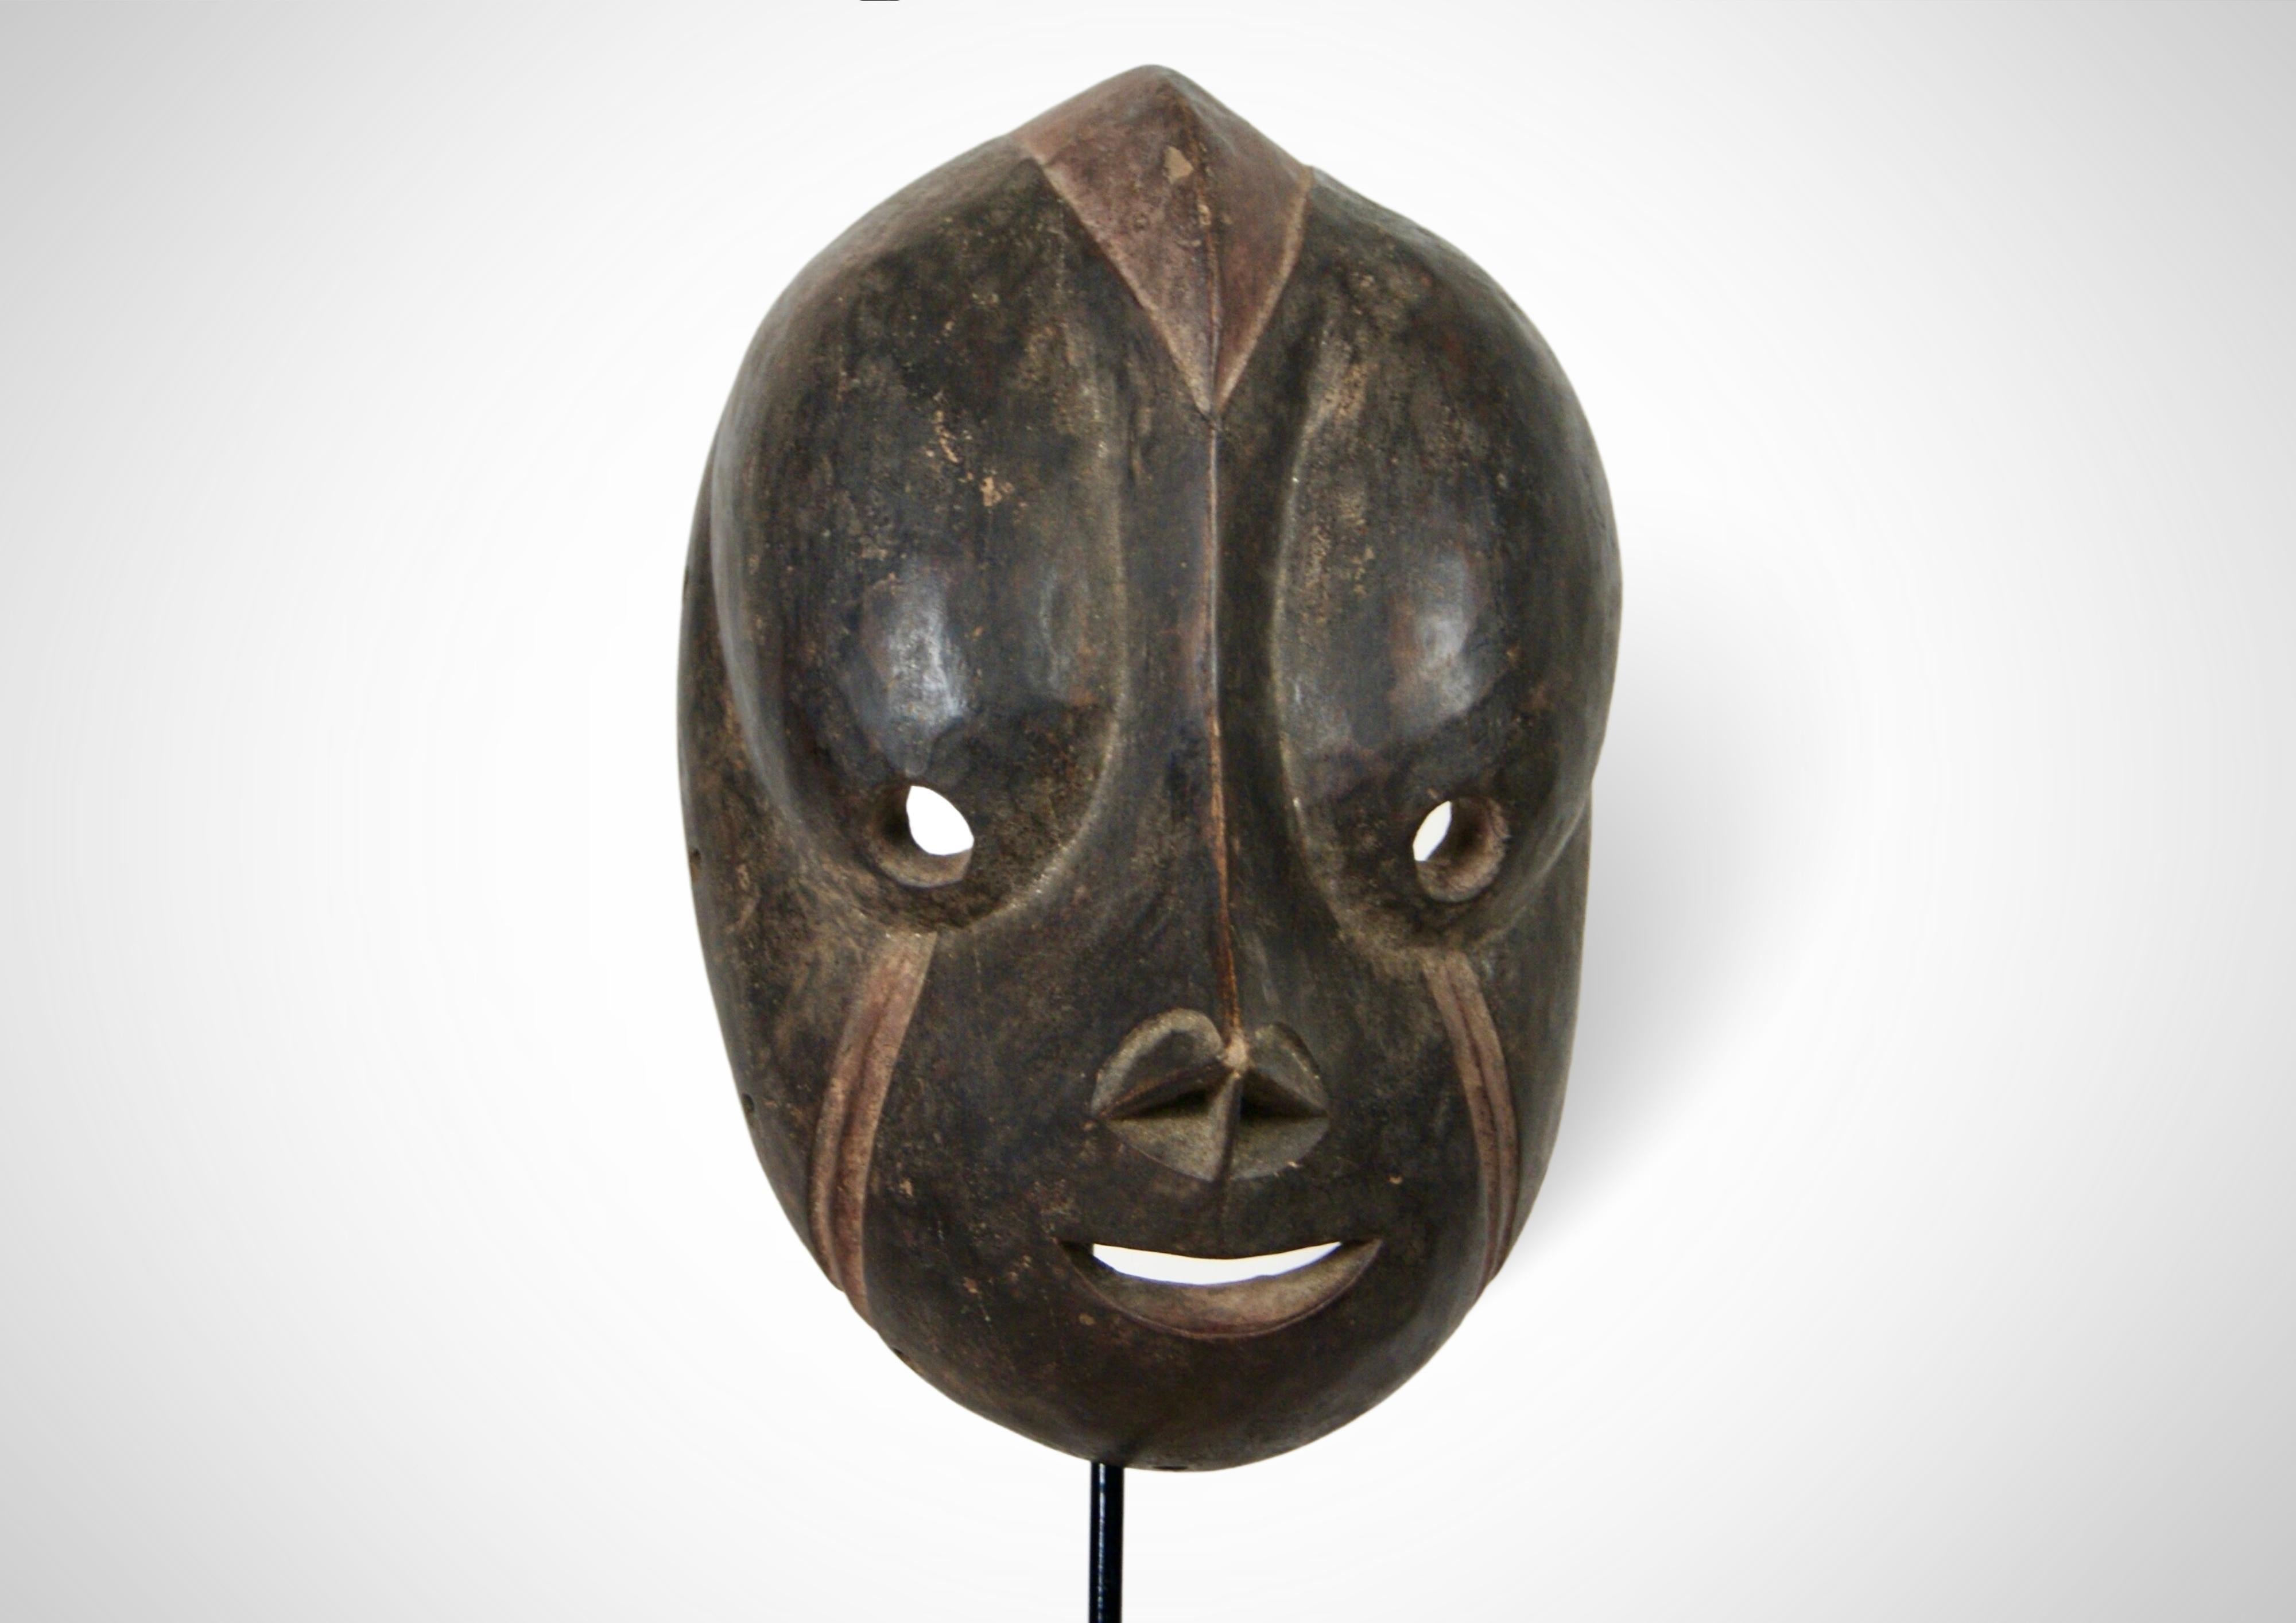 On offer is a rare large sized 'Singe' Monkey mask from the Bulu people of south central Cameroon. The Bulu are a sub-group of the Cameroon Fang, having originated from Gabon.
 
This is a typical boldly carved Bulu mask, very smooth and beautifully